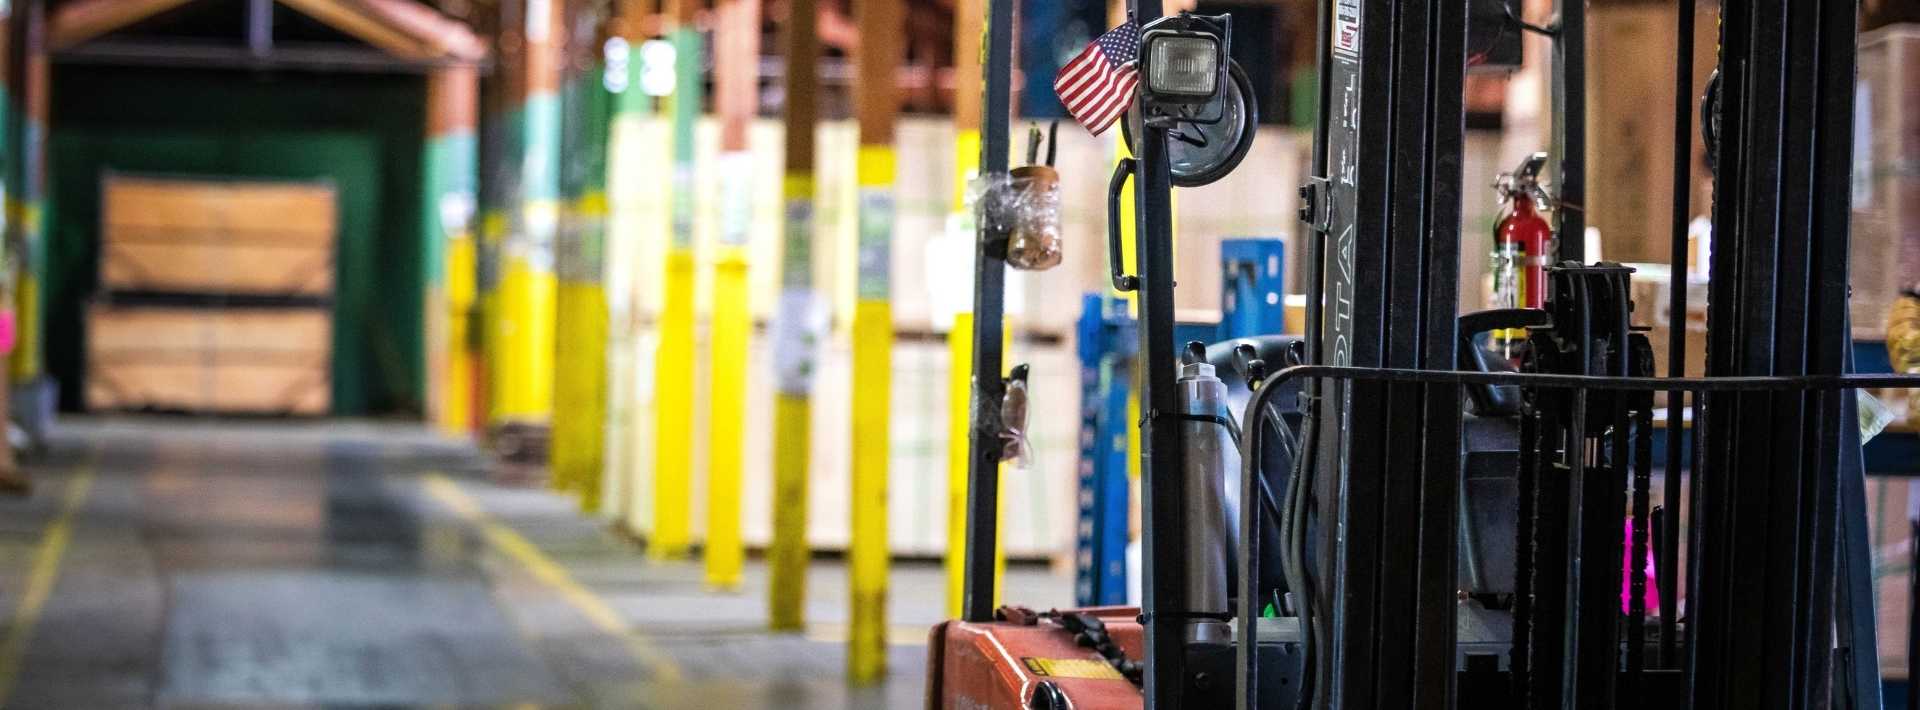 A forklift with small American flag sits in Ventamatic's bath fan warehouse in Mineral Wells, Texas.